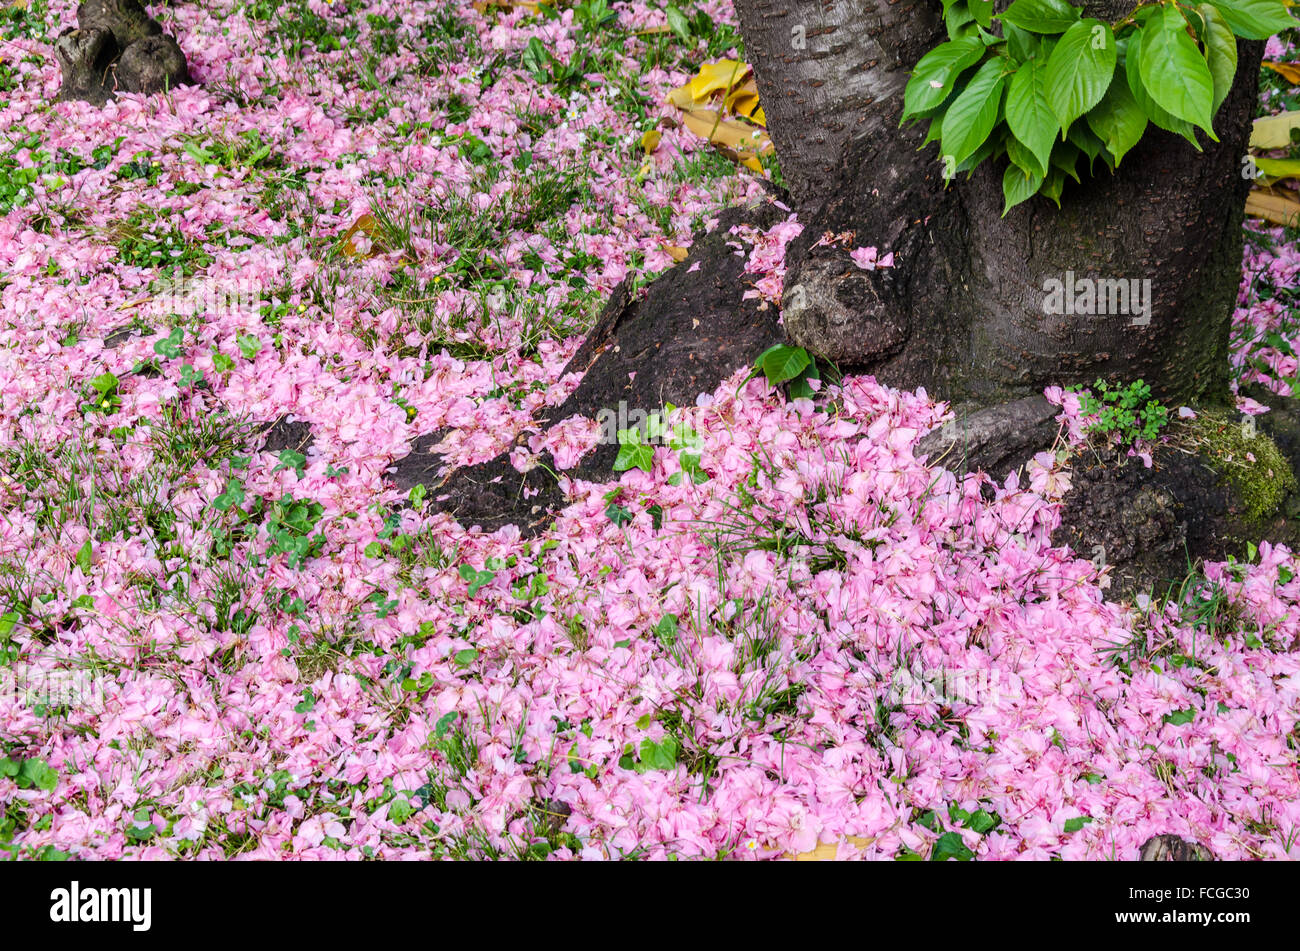 zen like stile life with trunk and flowers fallen on the ground Stock Photo